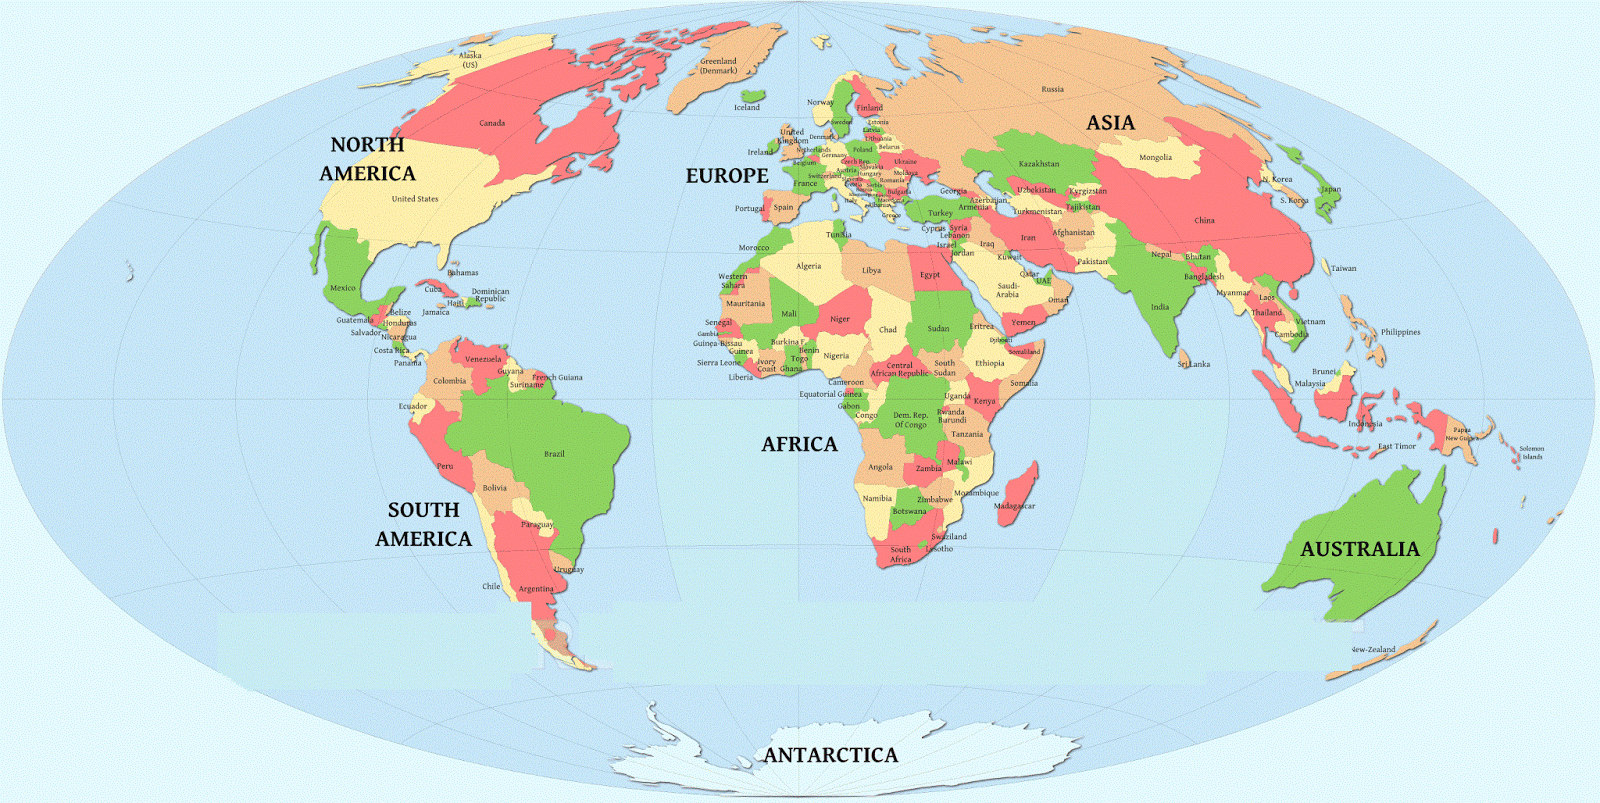 know-all-about-the-continents-of-the-world